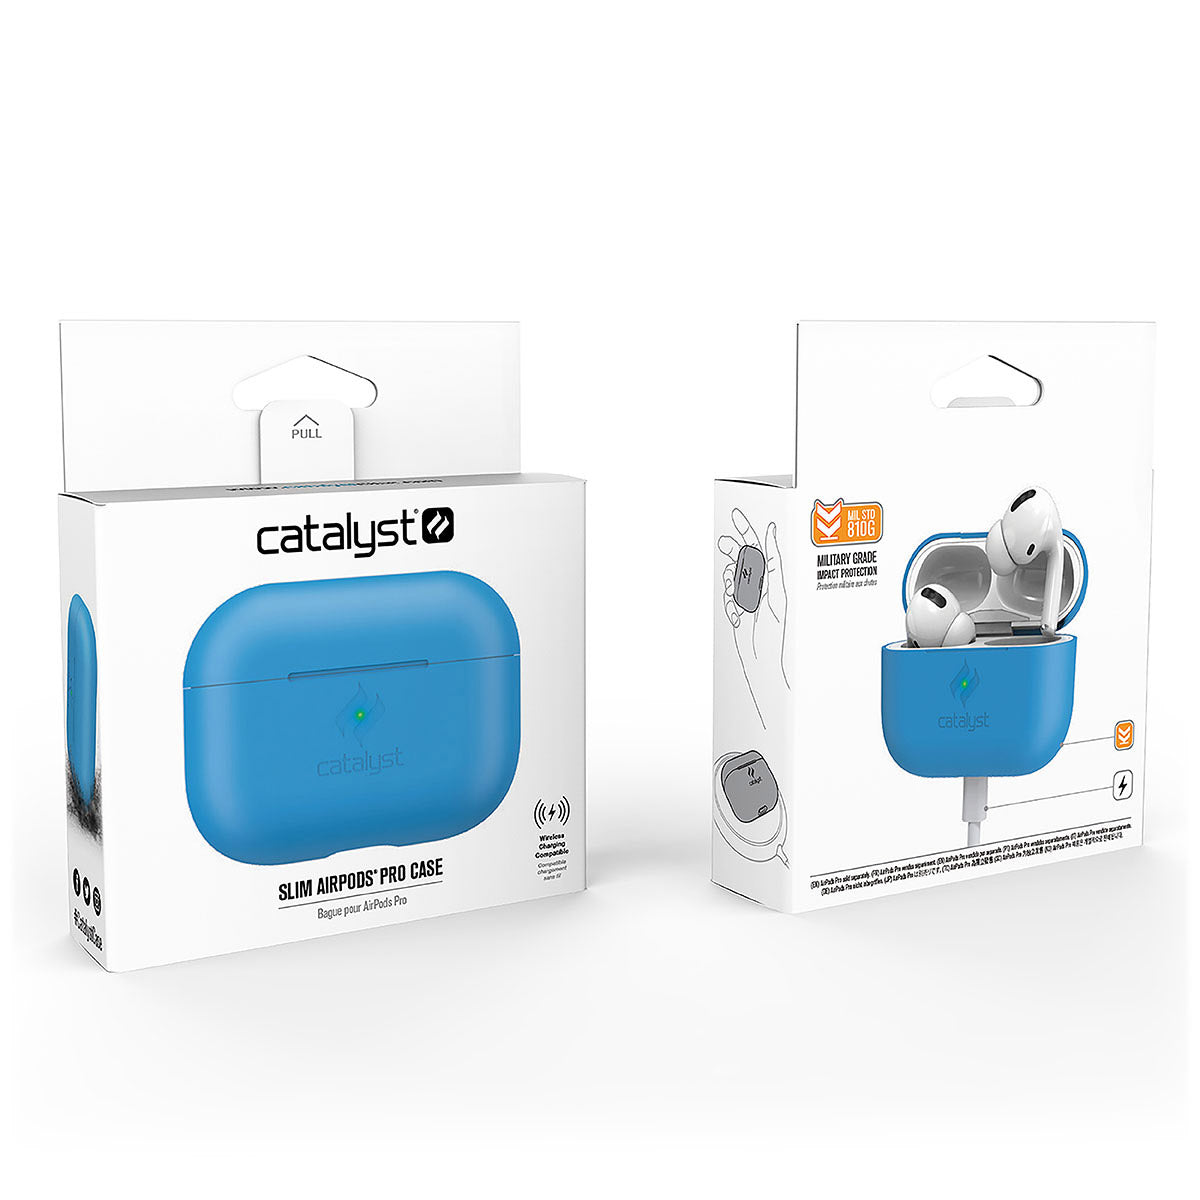 Catalyst airpods pro gen 2/1 slim case showing the front and back view of the packaging in a neon blue colorway